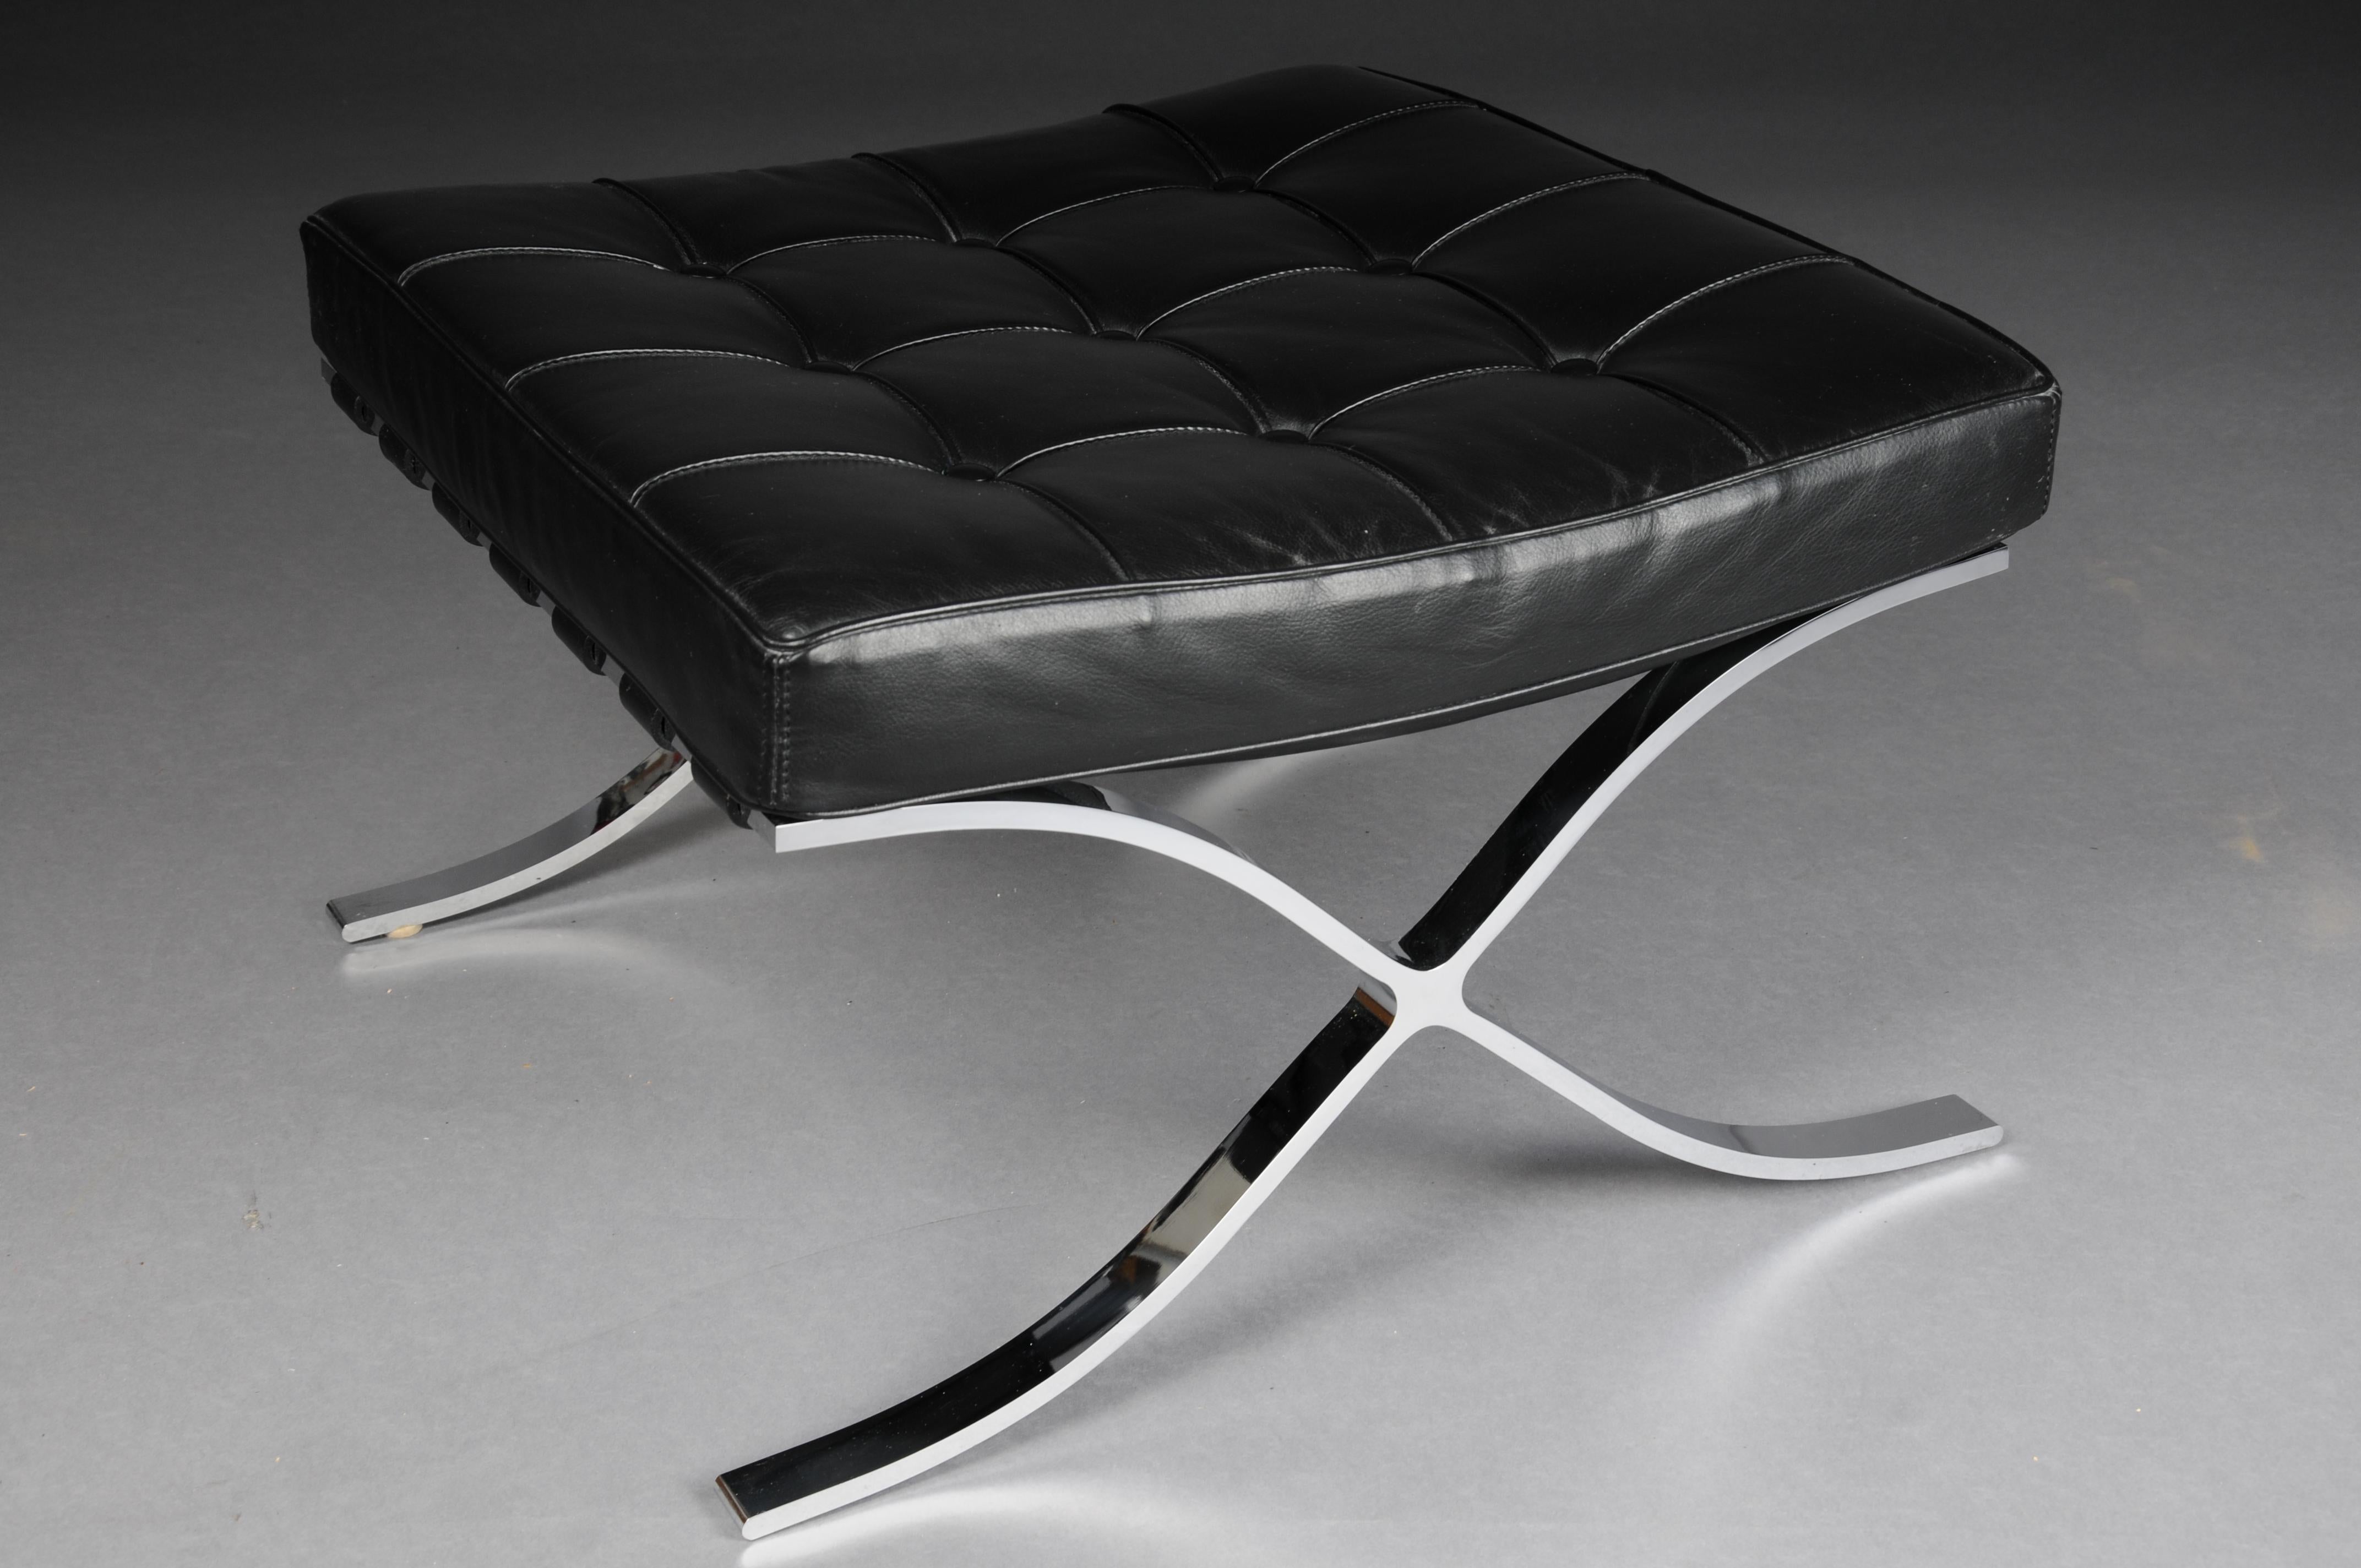 Designer stool by ALIVAR, Bareclona, Made in Italy

Solid chrome frame with black genuine leather upholstery.

Very elegant and timeless design.

An absolute design classic with a very high recognition value.

The seat has been reupholstered with